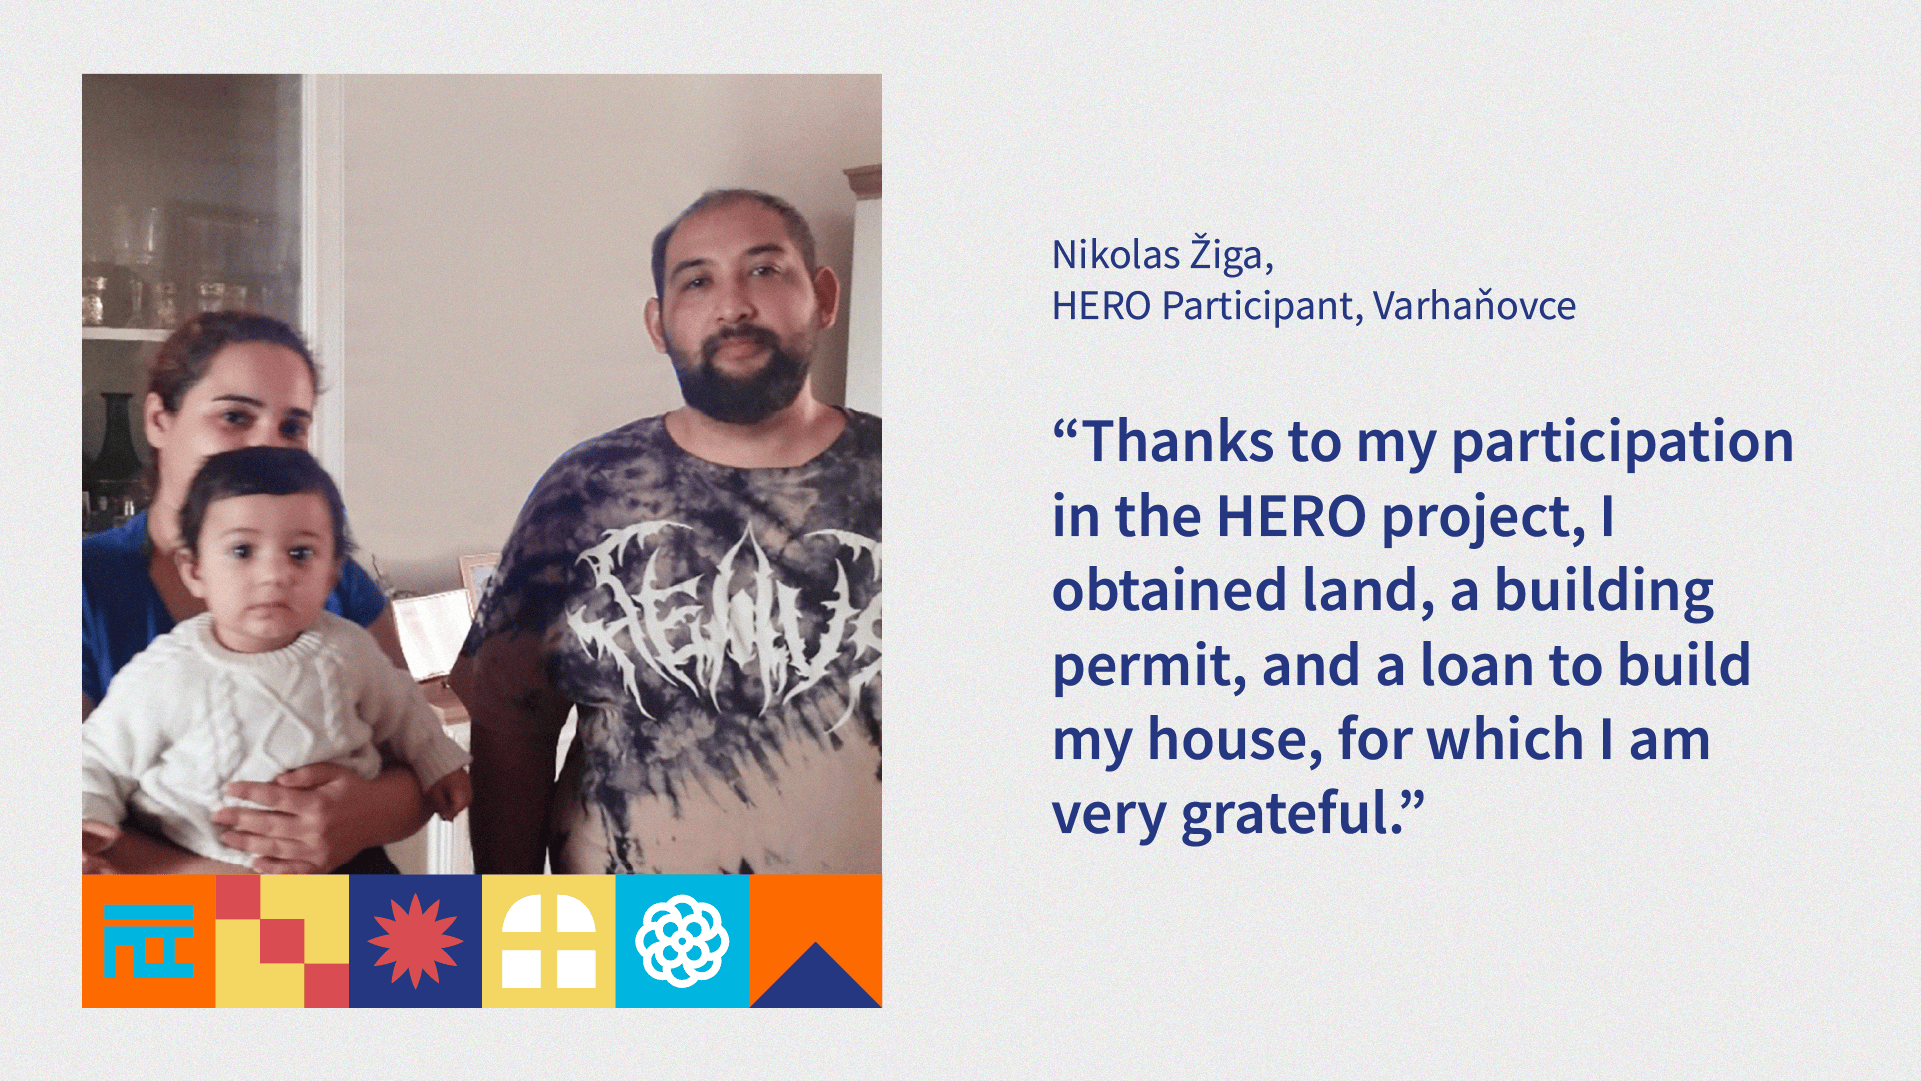 Thanks to my participation in the HERO project, I obtained land, a building permit, and a loan to build my house, for which I am very grateful